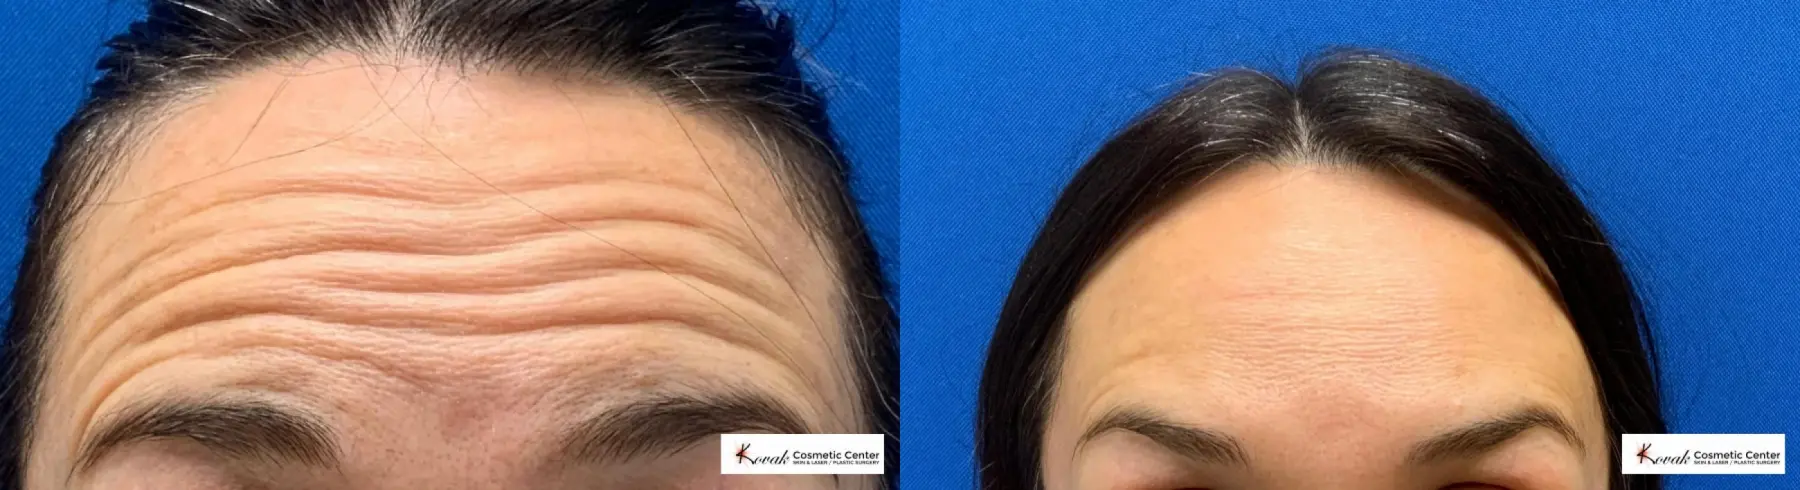 Neurotox Treatment using Jeuveau on a 40 year old female - Before and After  